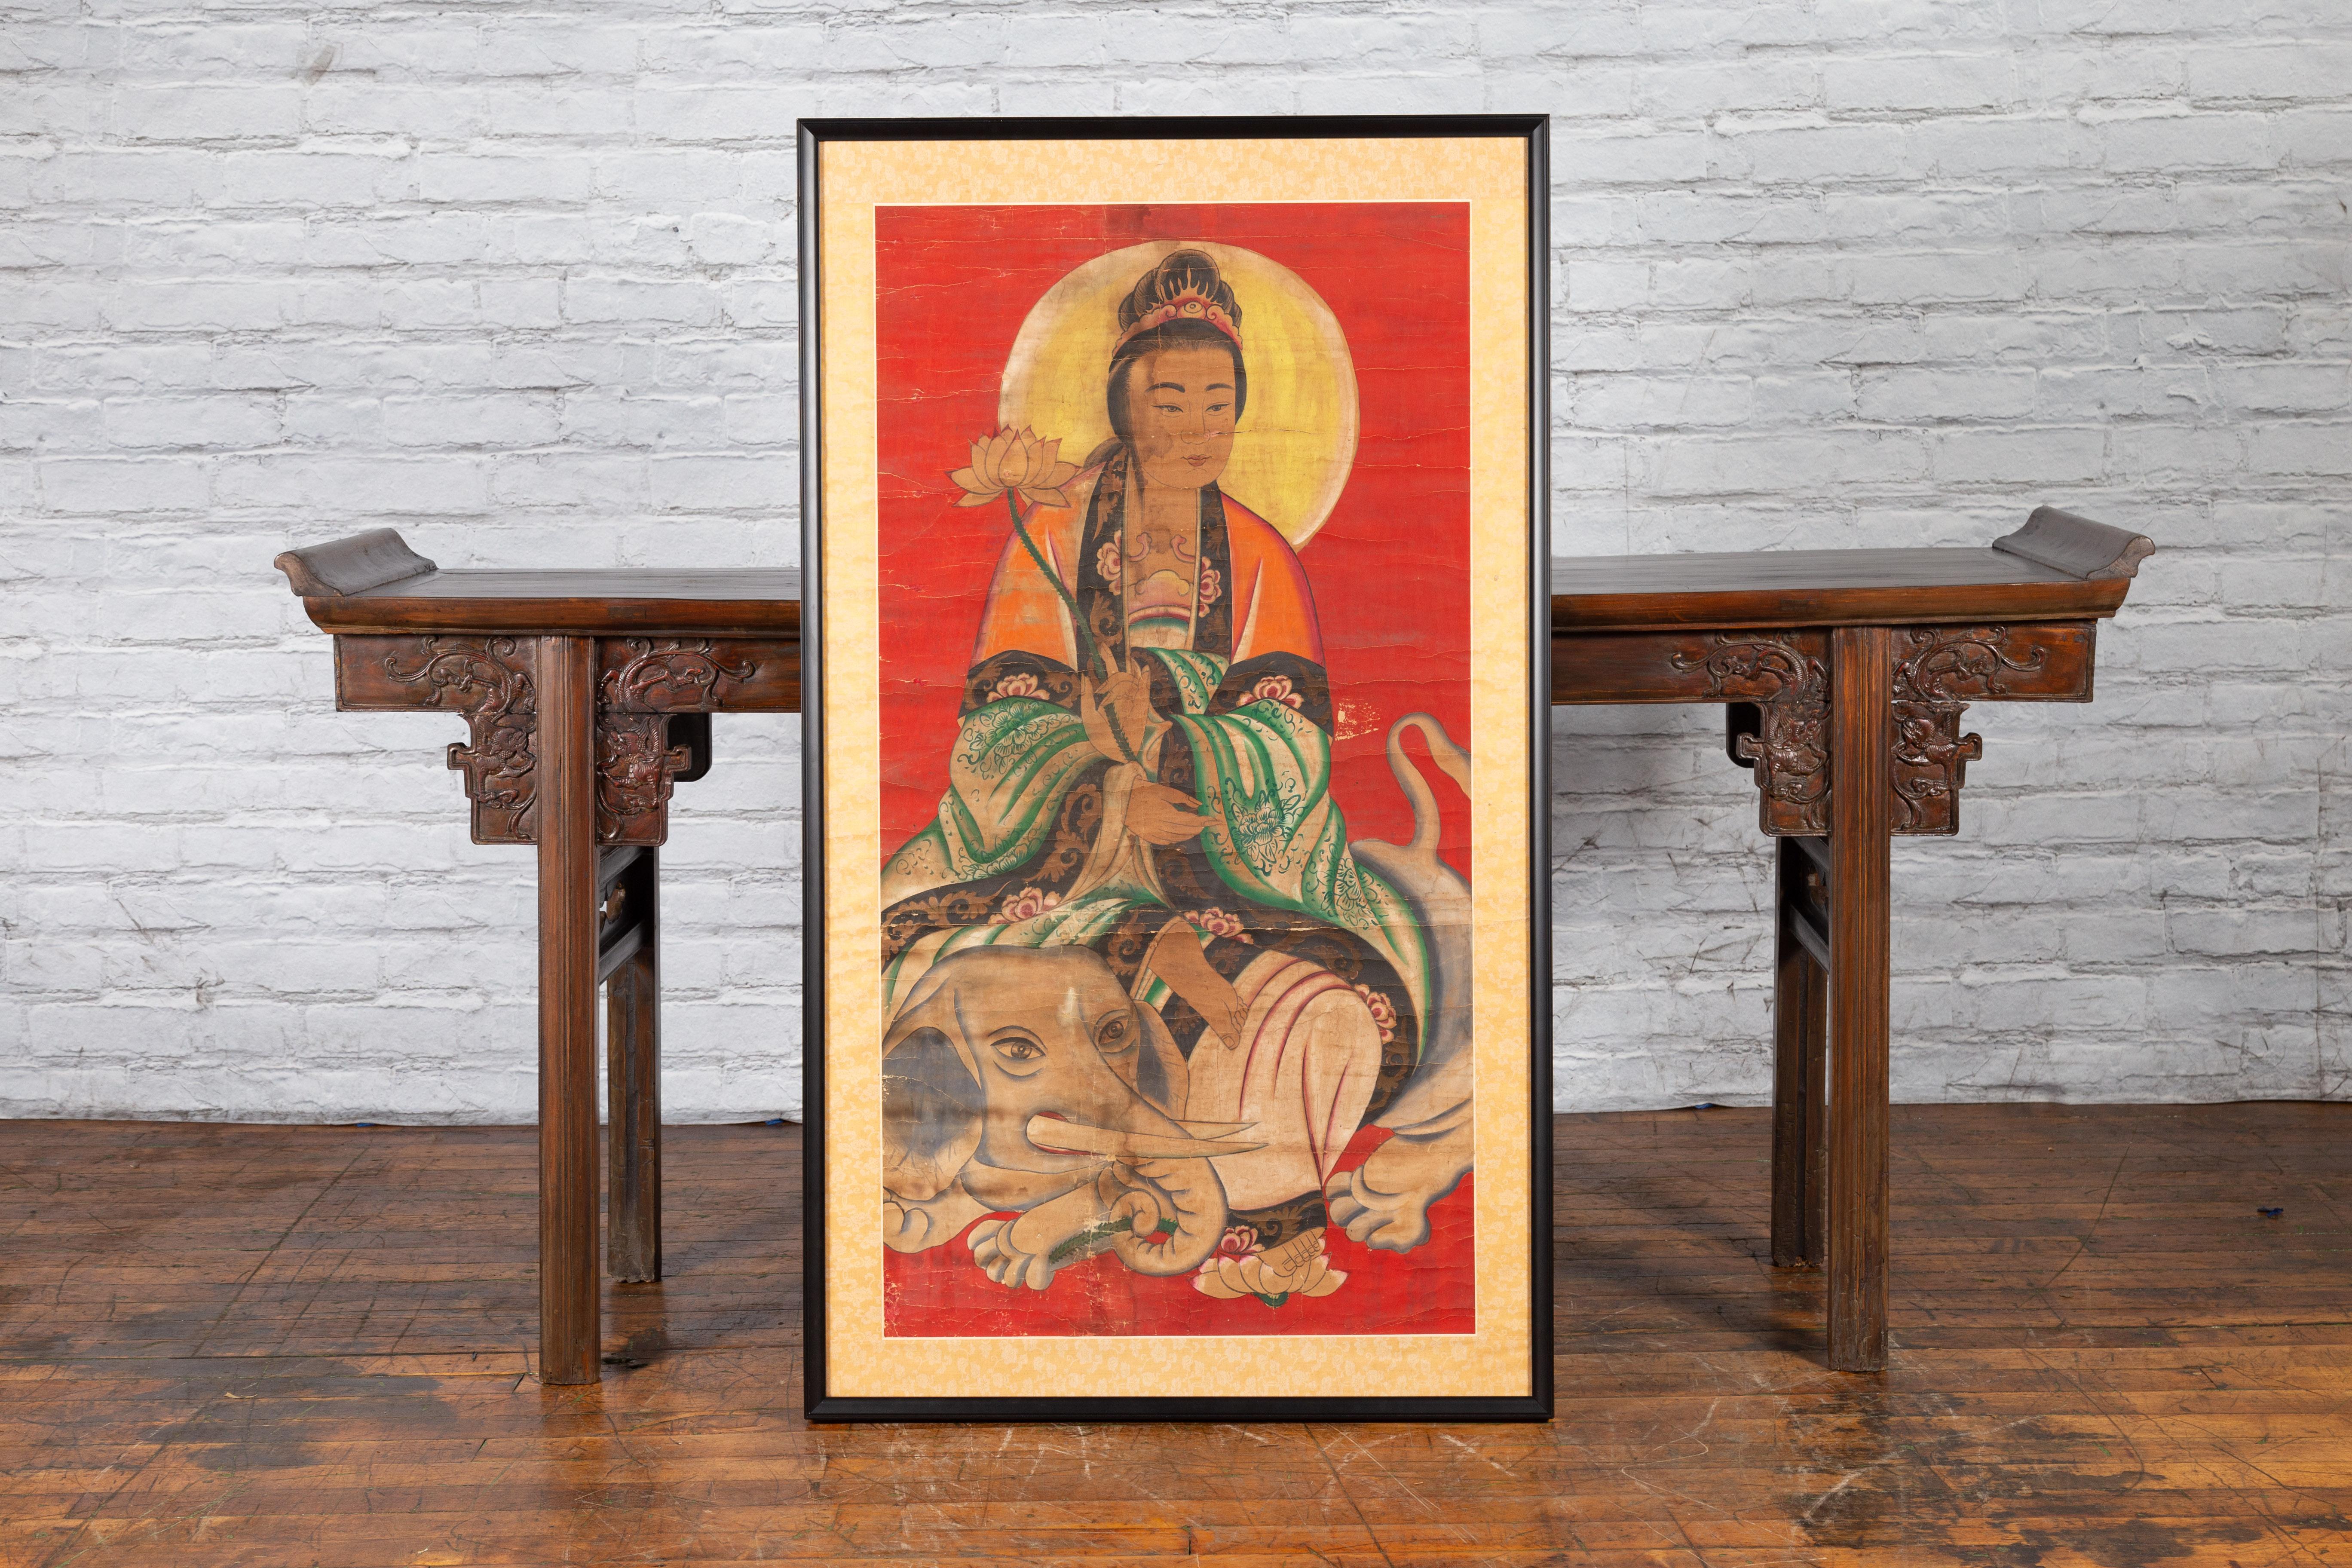 An antique Indian print from the 19th century depicting Guanyin the Bodhisattva of Compassion. Created in India during the 19th century, this large print features Guanyin the Bodhisattva of Compassion, sitting on a noble elephant. Holding a lotus